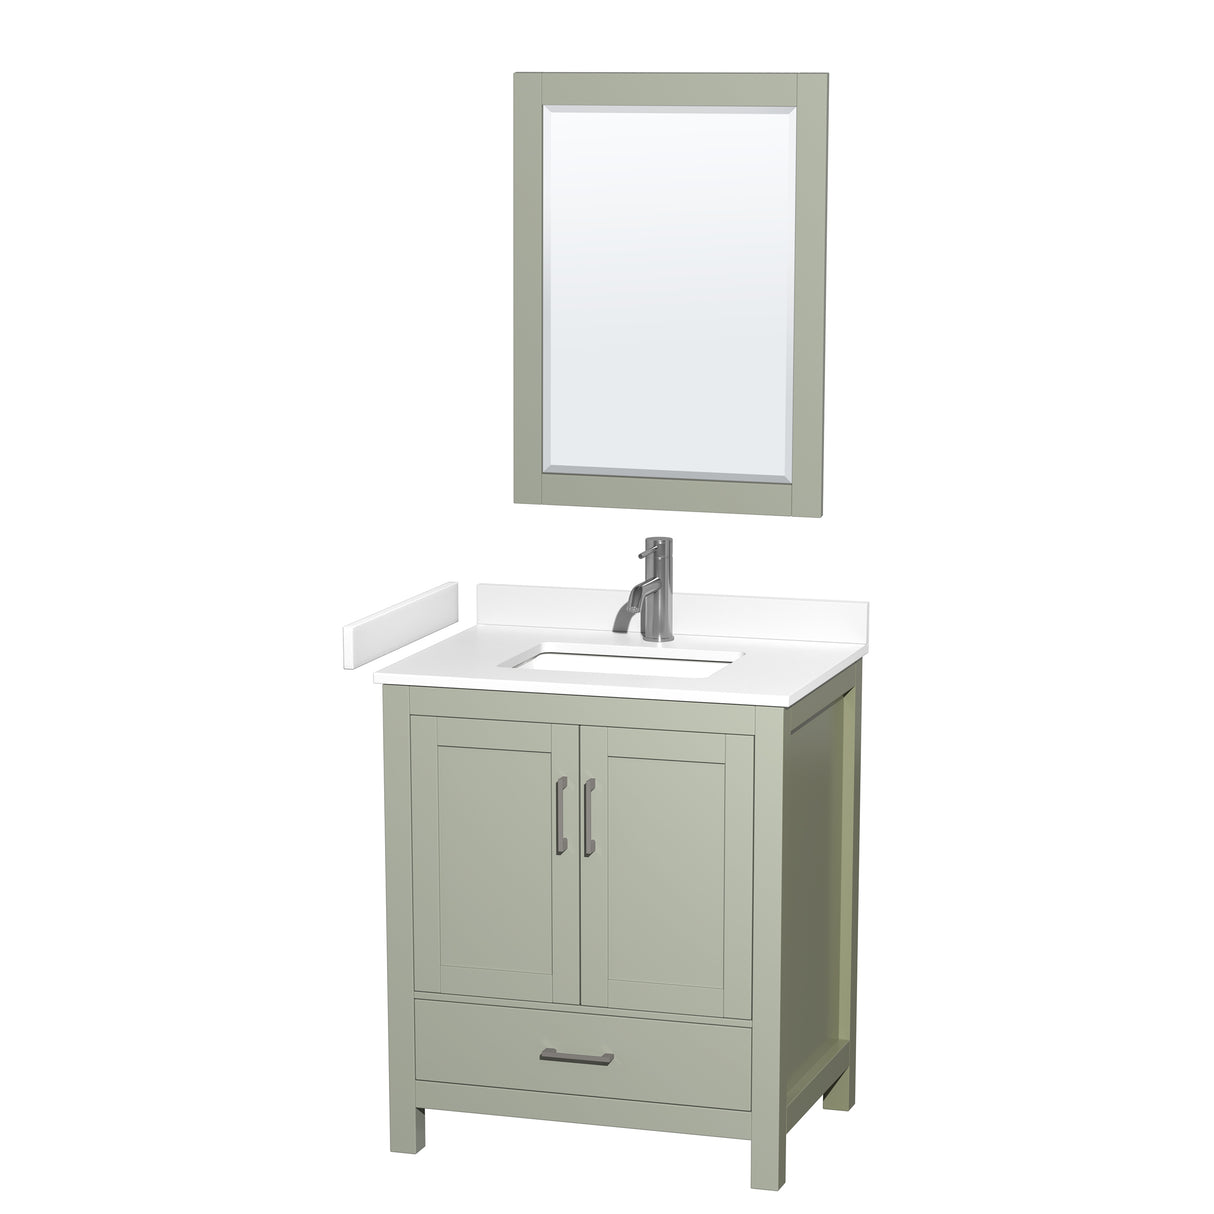 Sheffield 30 inch Single Bathroom Vanity in Light Green White Cultured Marble Countertop Undermount Square Sink Brushed Nickel Trim 24 inch Mirror